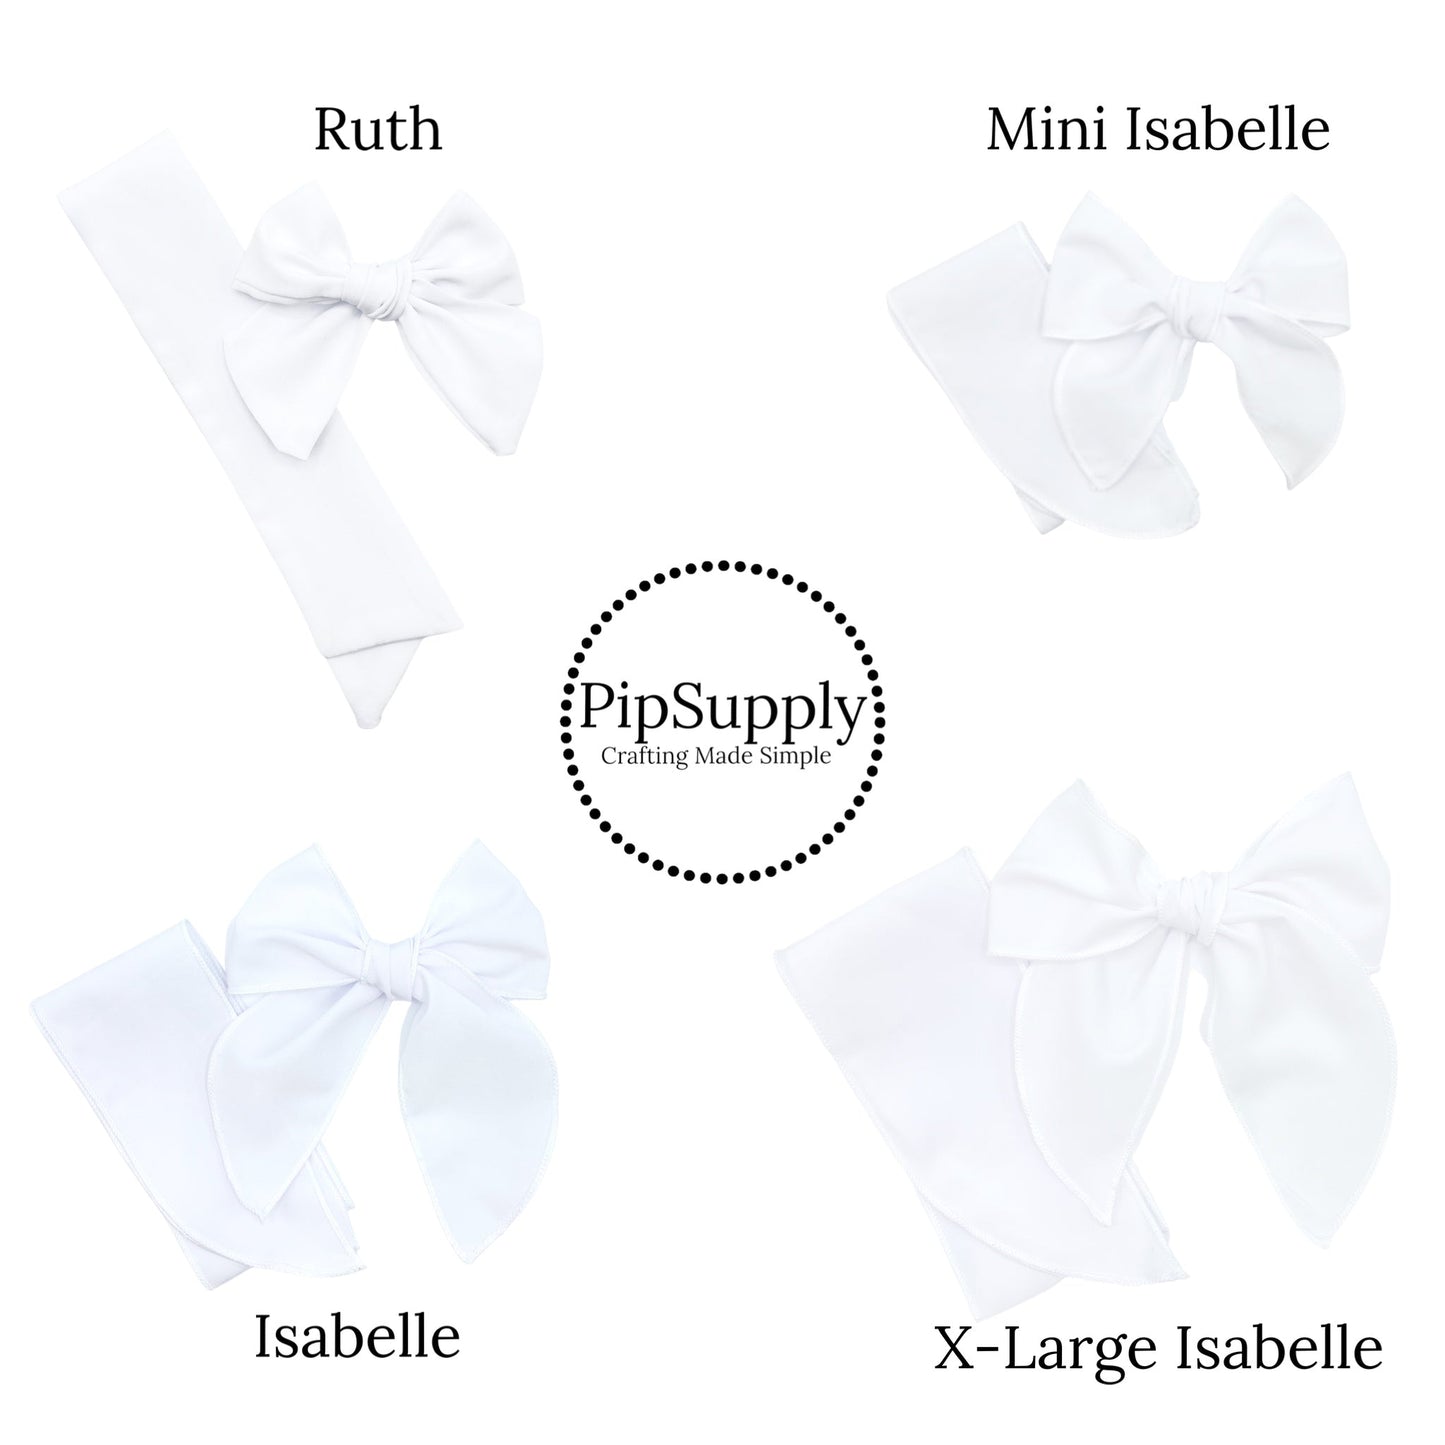 Pastel Circus Acts Hair Bow Strips